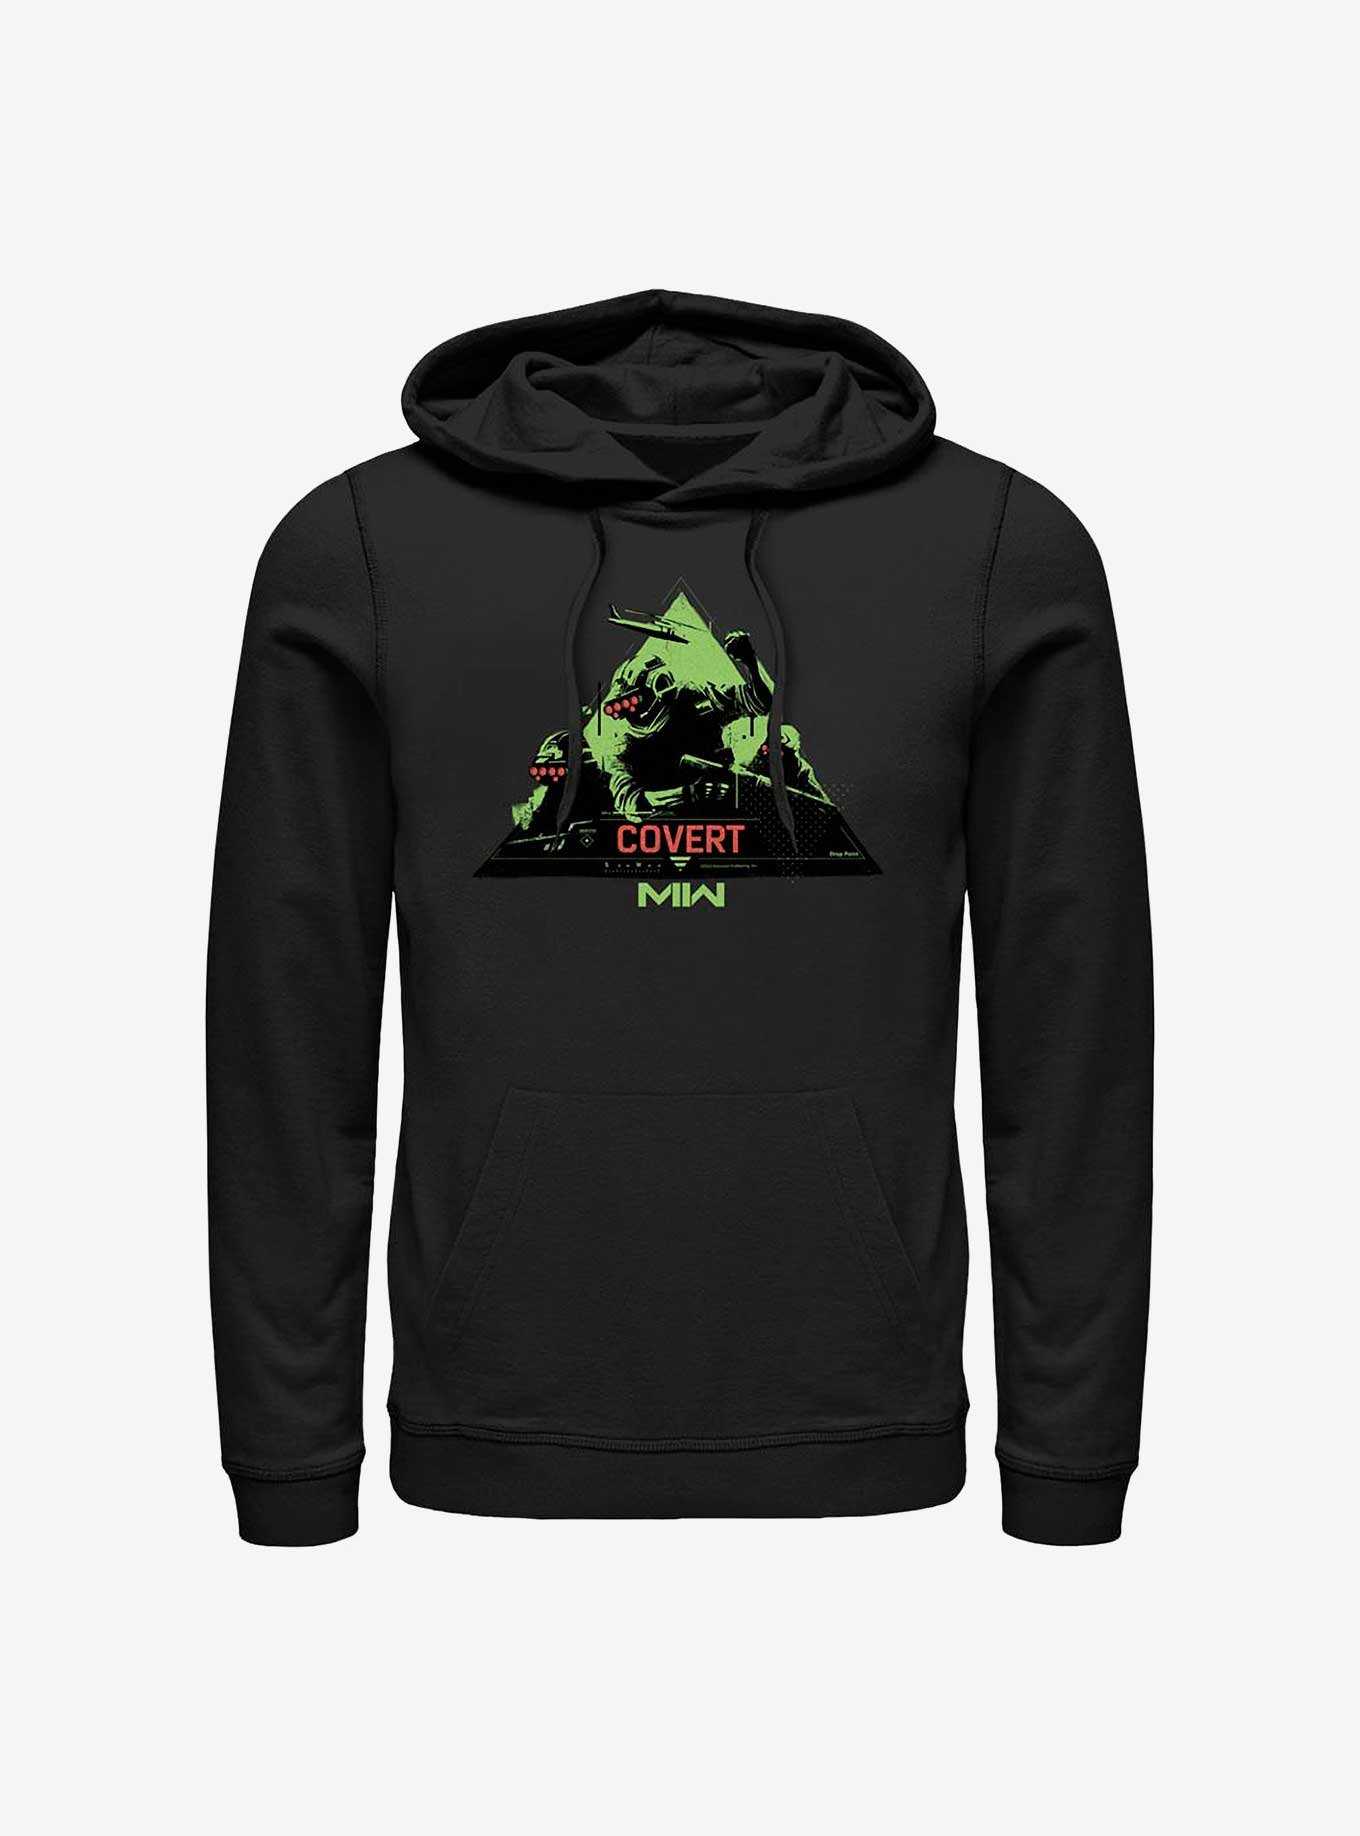 Call Of Duty Mission Covert Hoodie, , hi-res